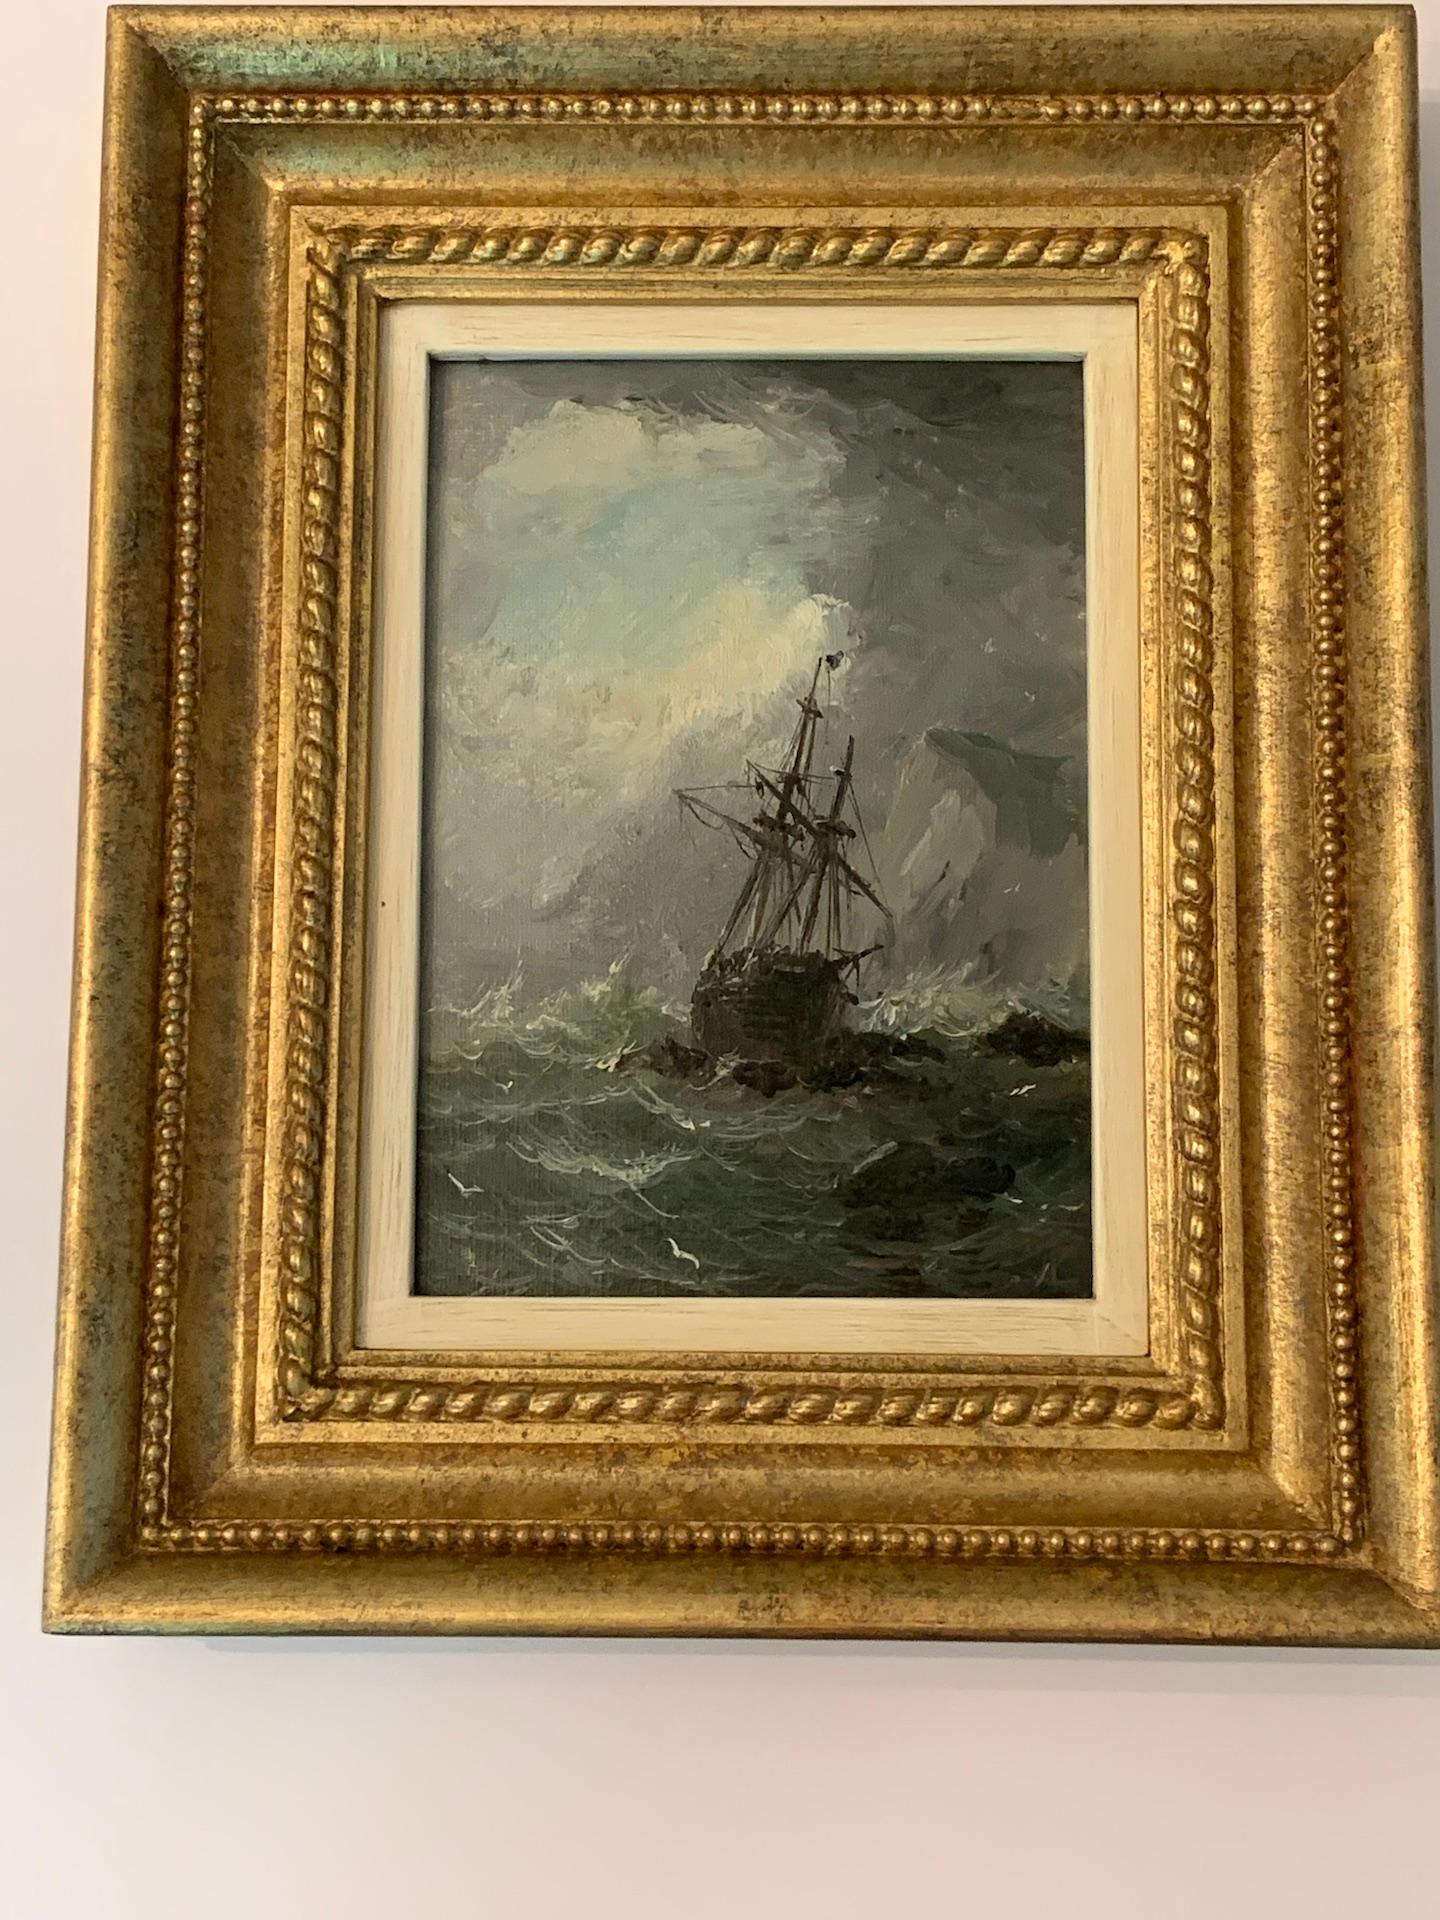 Adolphus Knell Landscape Painting - Antique Victorian, Impressionist 19th century English oil, Fishings boat at Sea